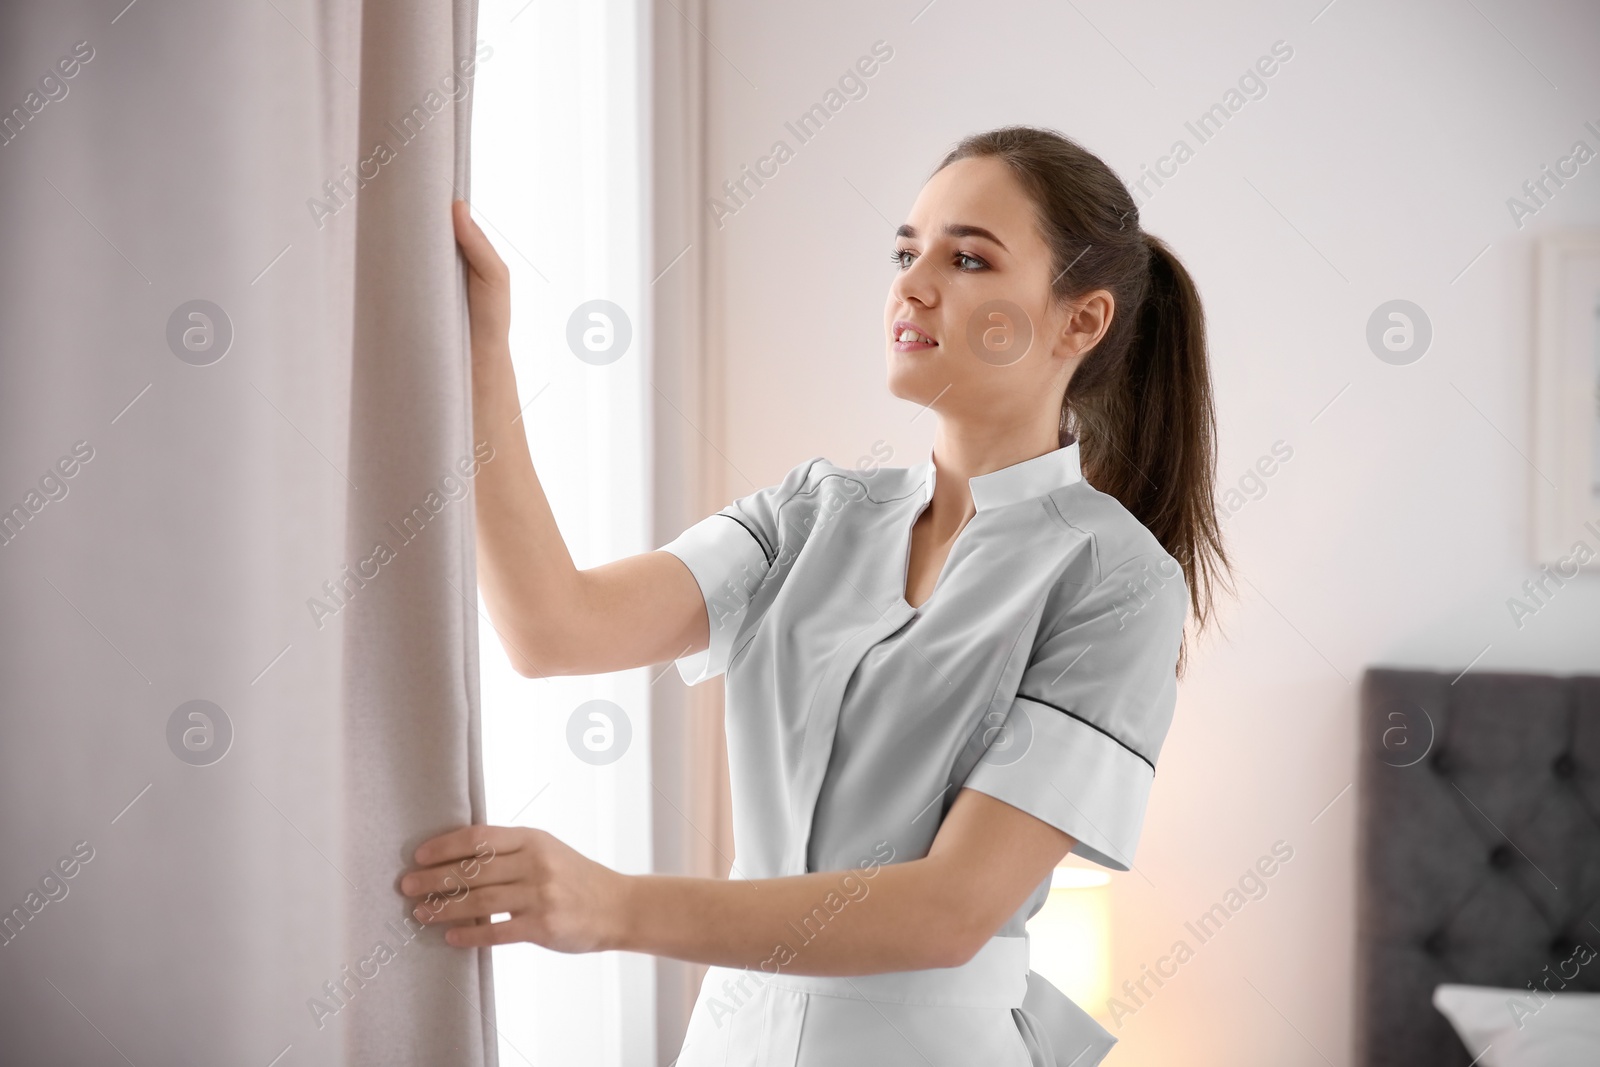 Photo of Young maid adjusting curtains in hotel room